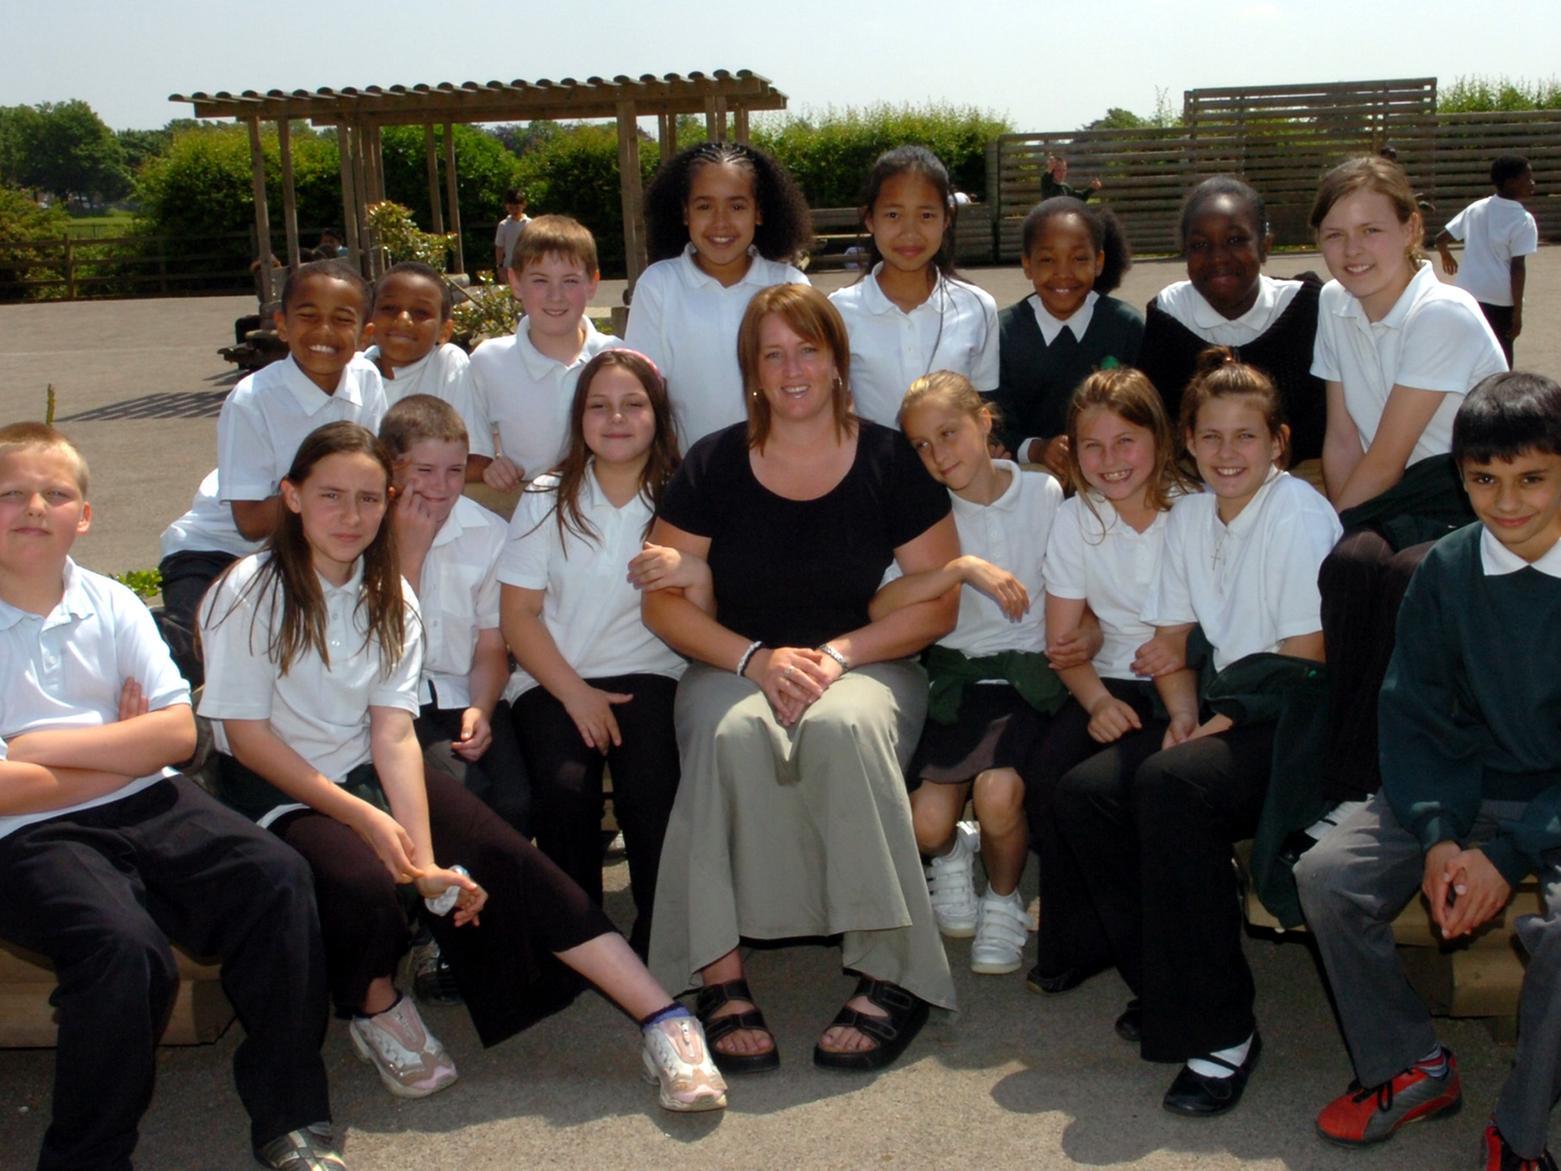 Oakway Junior School Wellingborough teacher of the year nomination 
Clare Wallace pictured with members of her class.
Tuesday, 06 June 2006